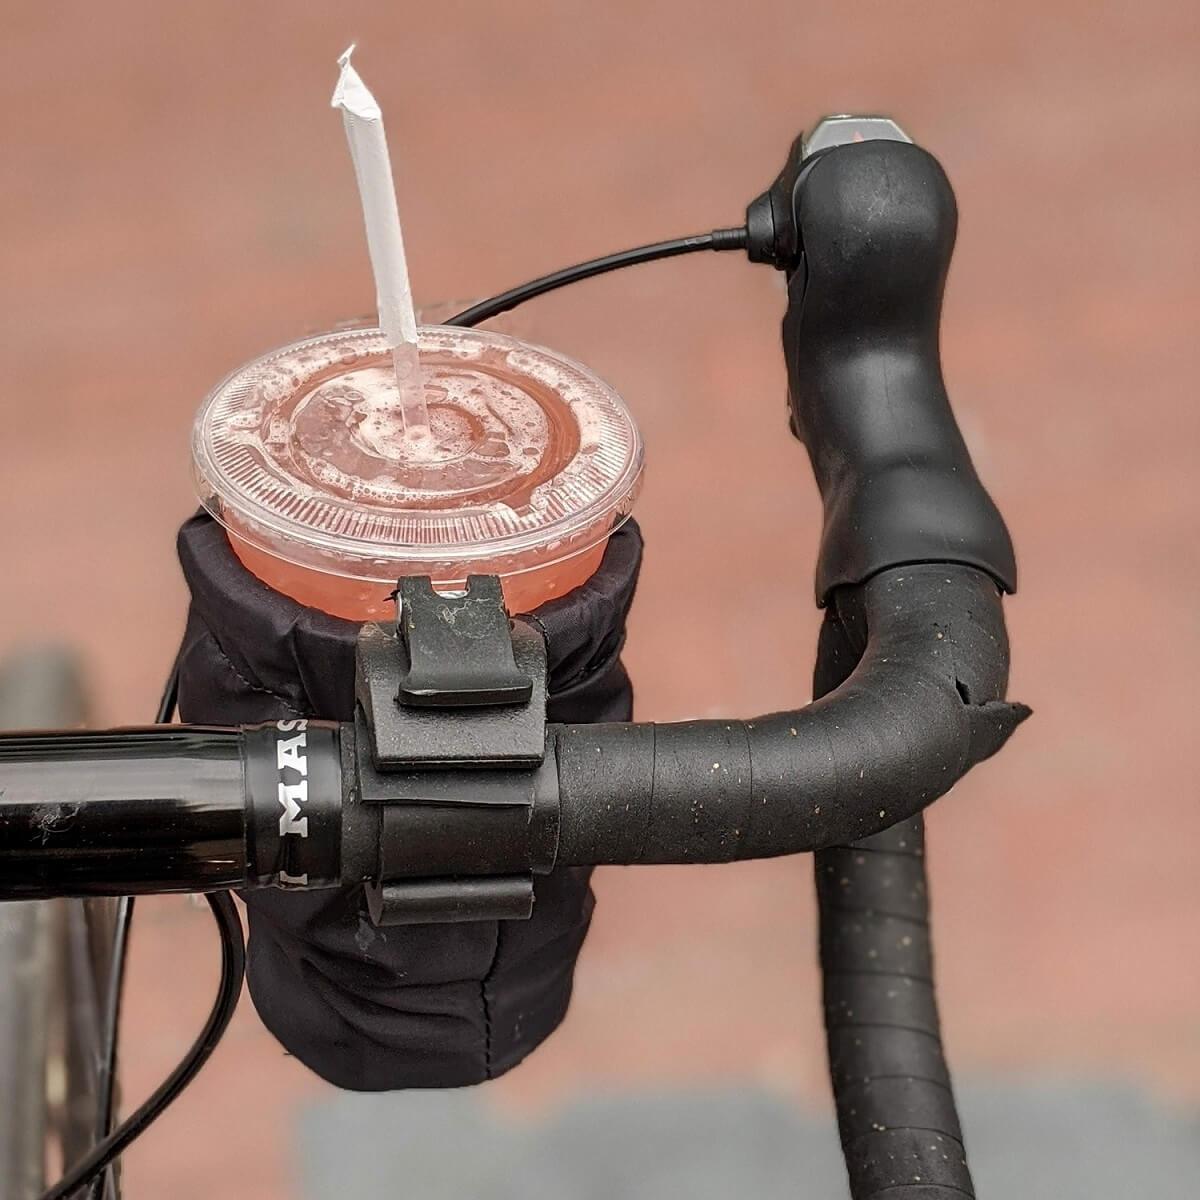 Clamp Mount Drink Holder : for coffee mugs